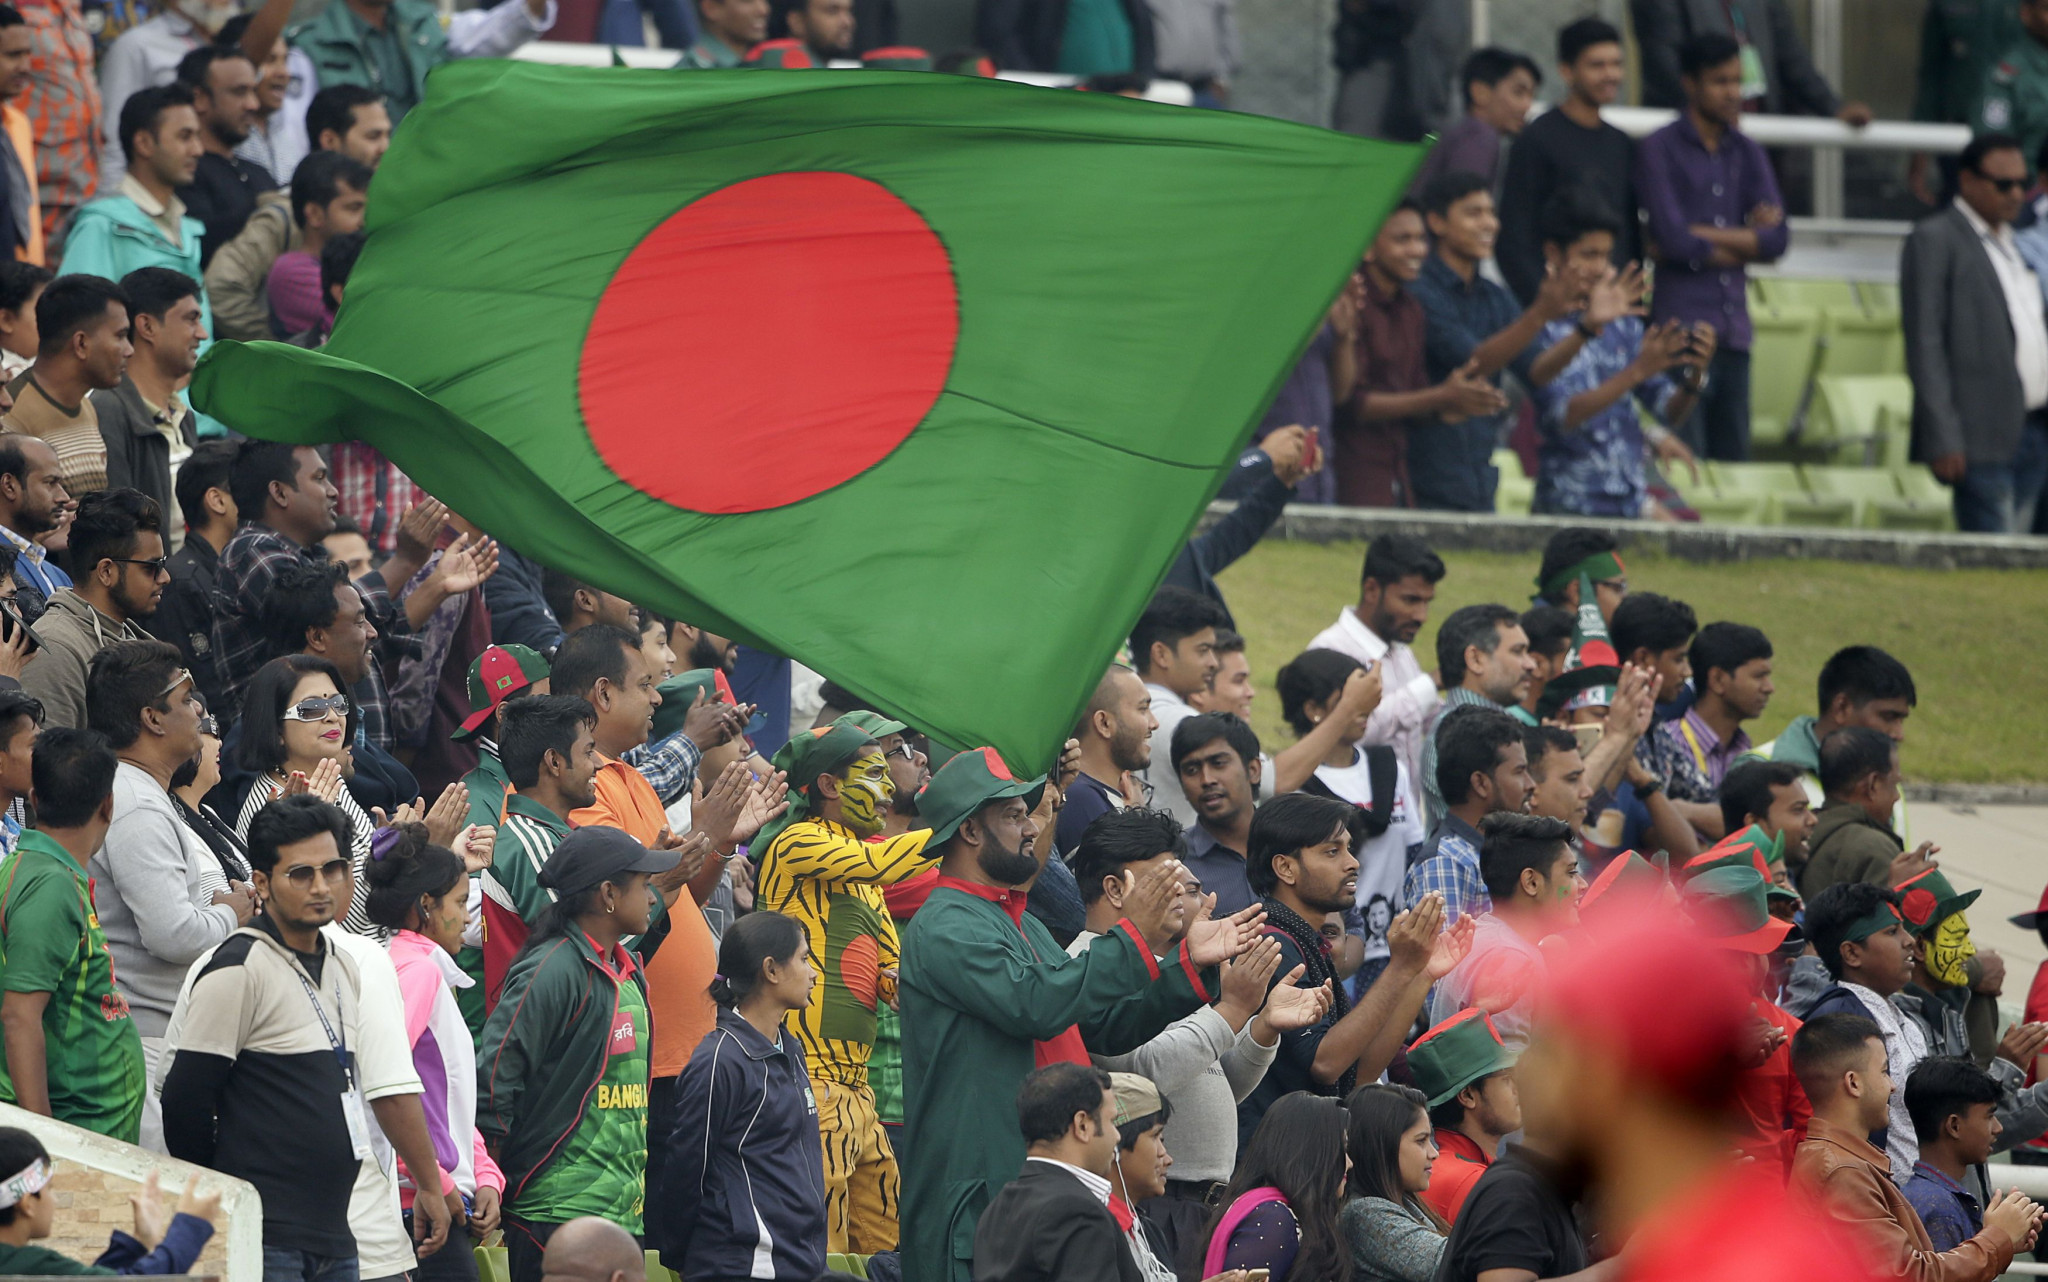 Bangladesh is set to compete in seven sports at Birmingham 2022 ©Getty Images